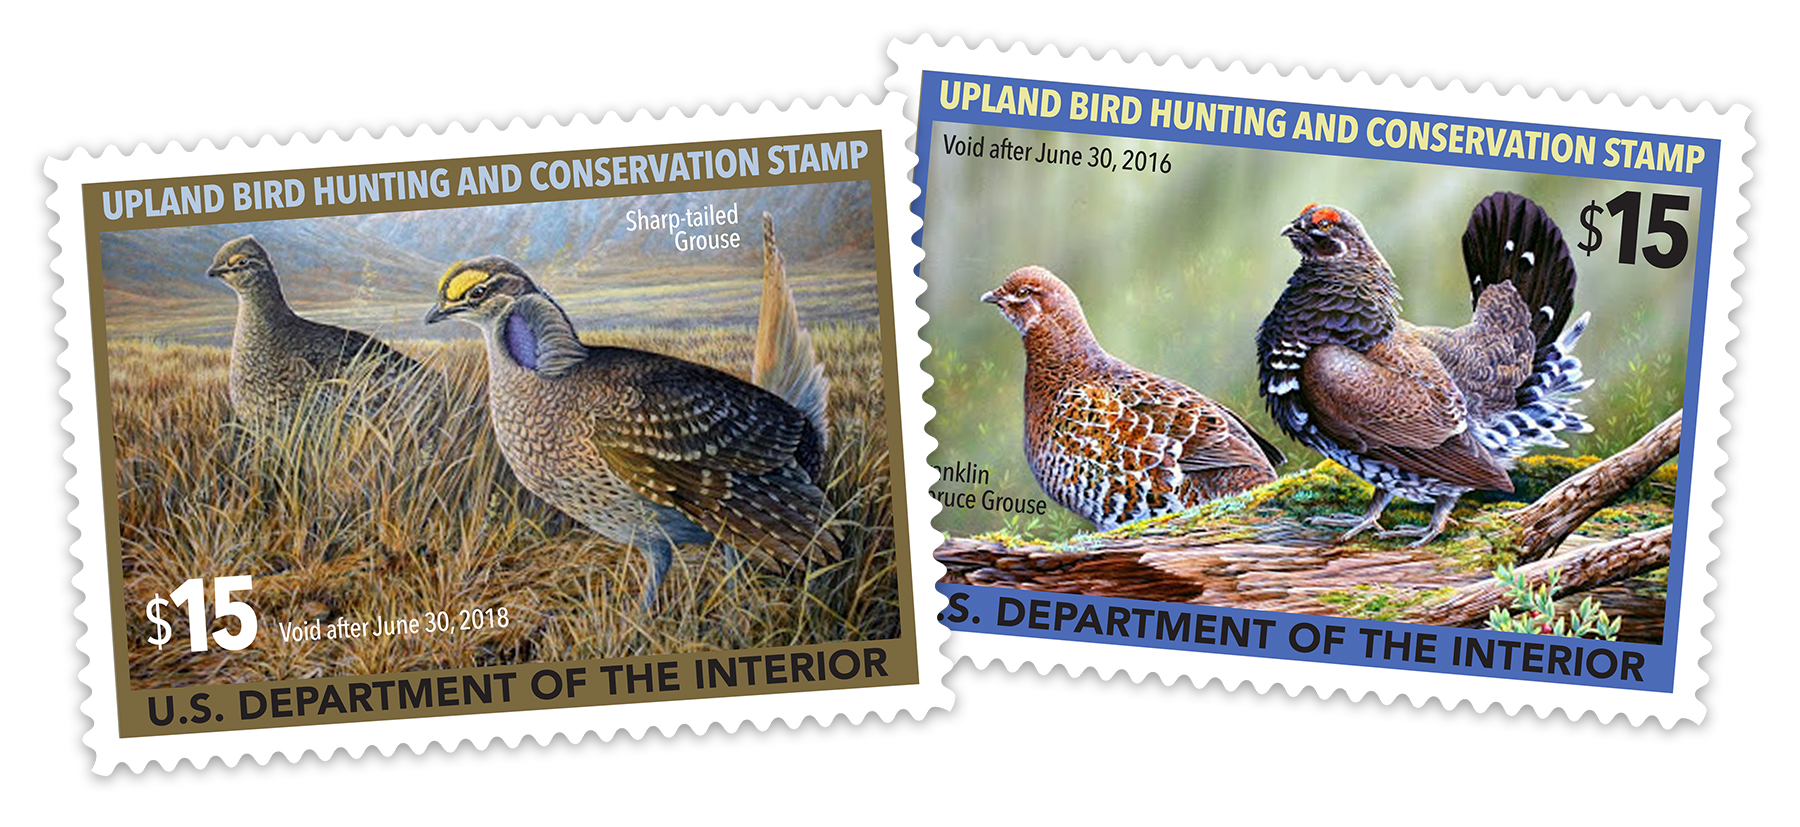 The Upland Stamp